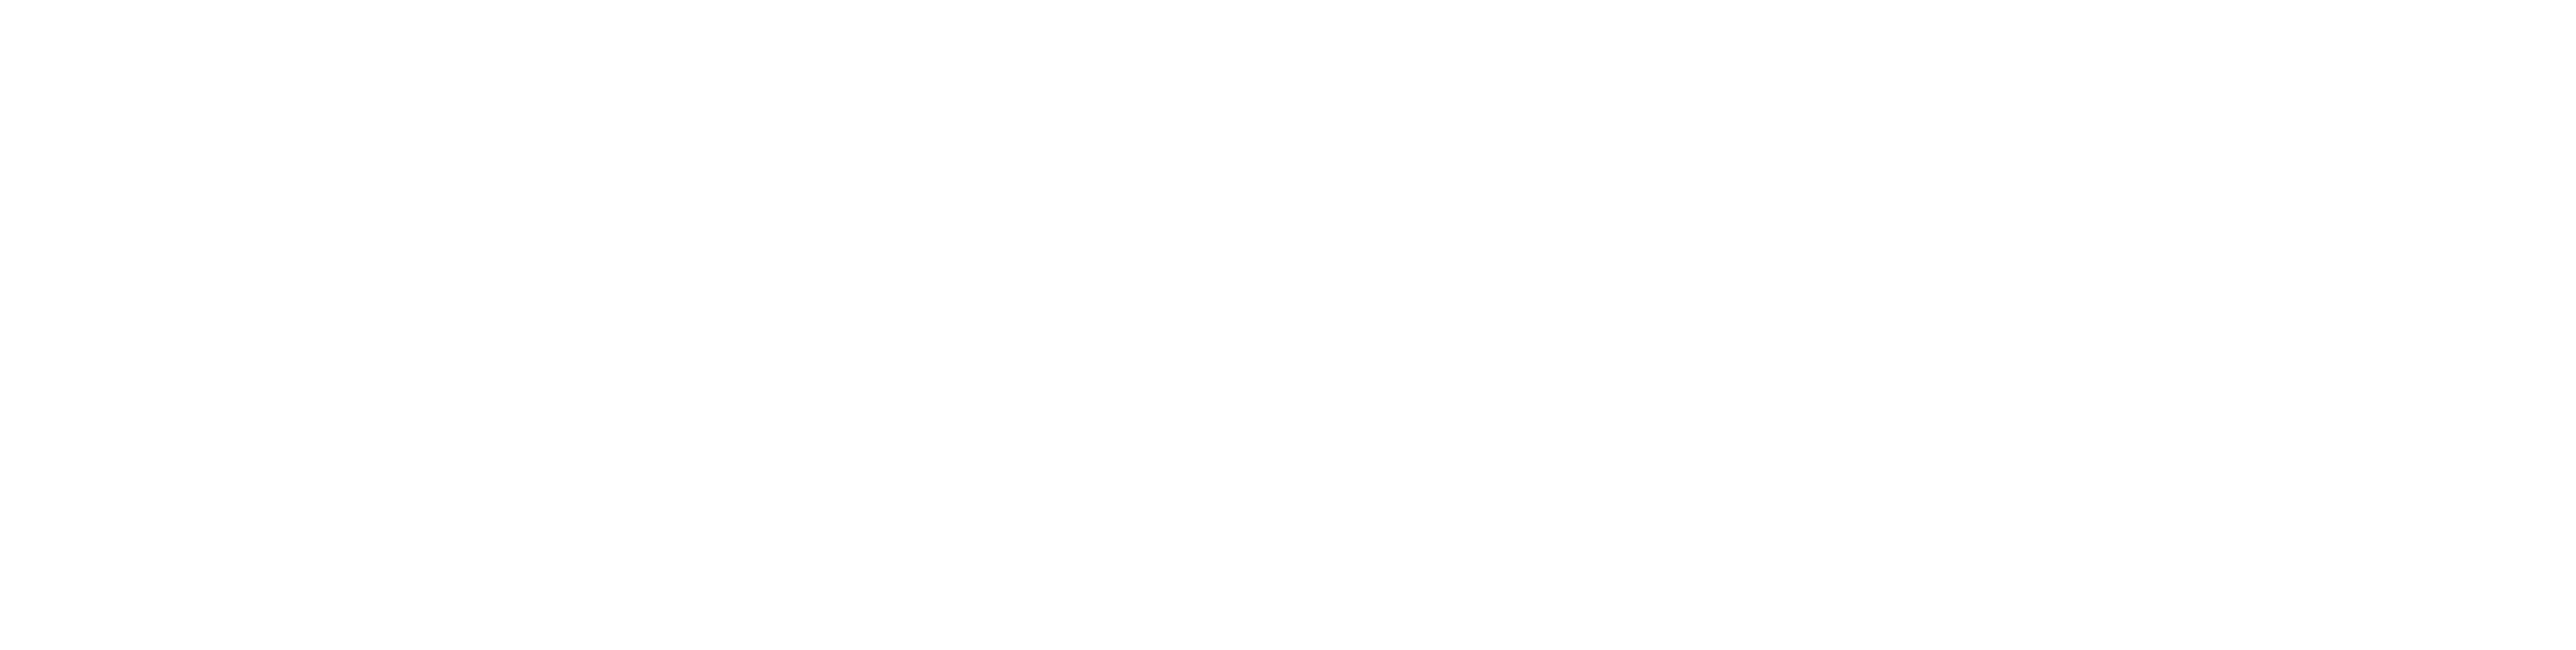 Hyde Engineering Services